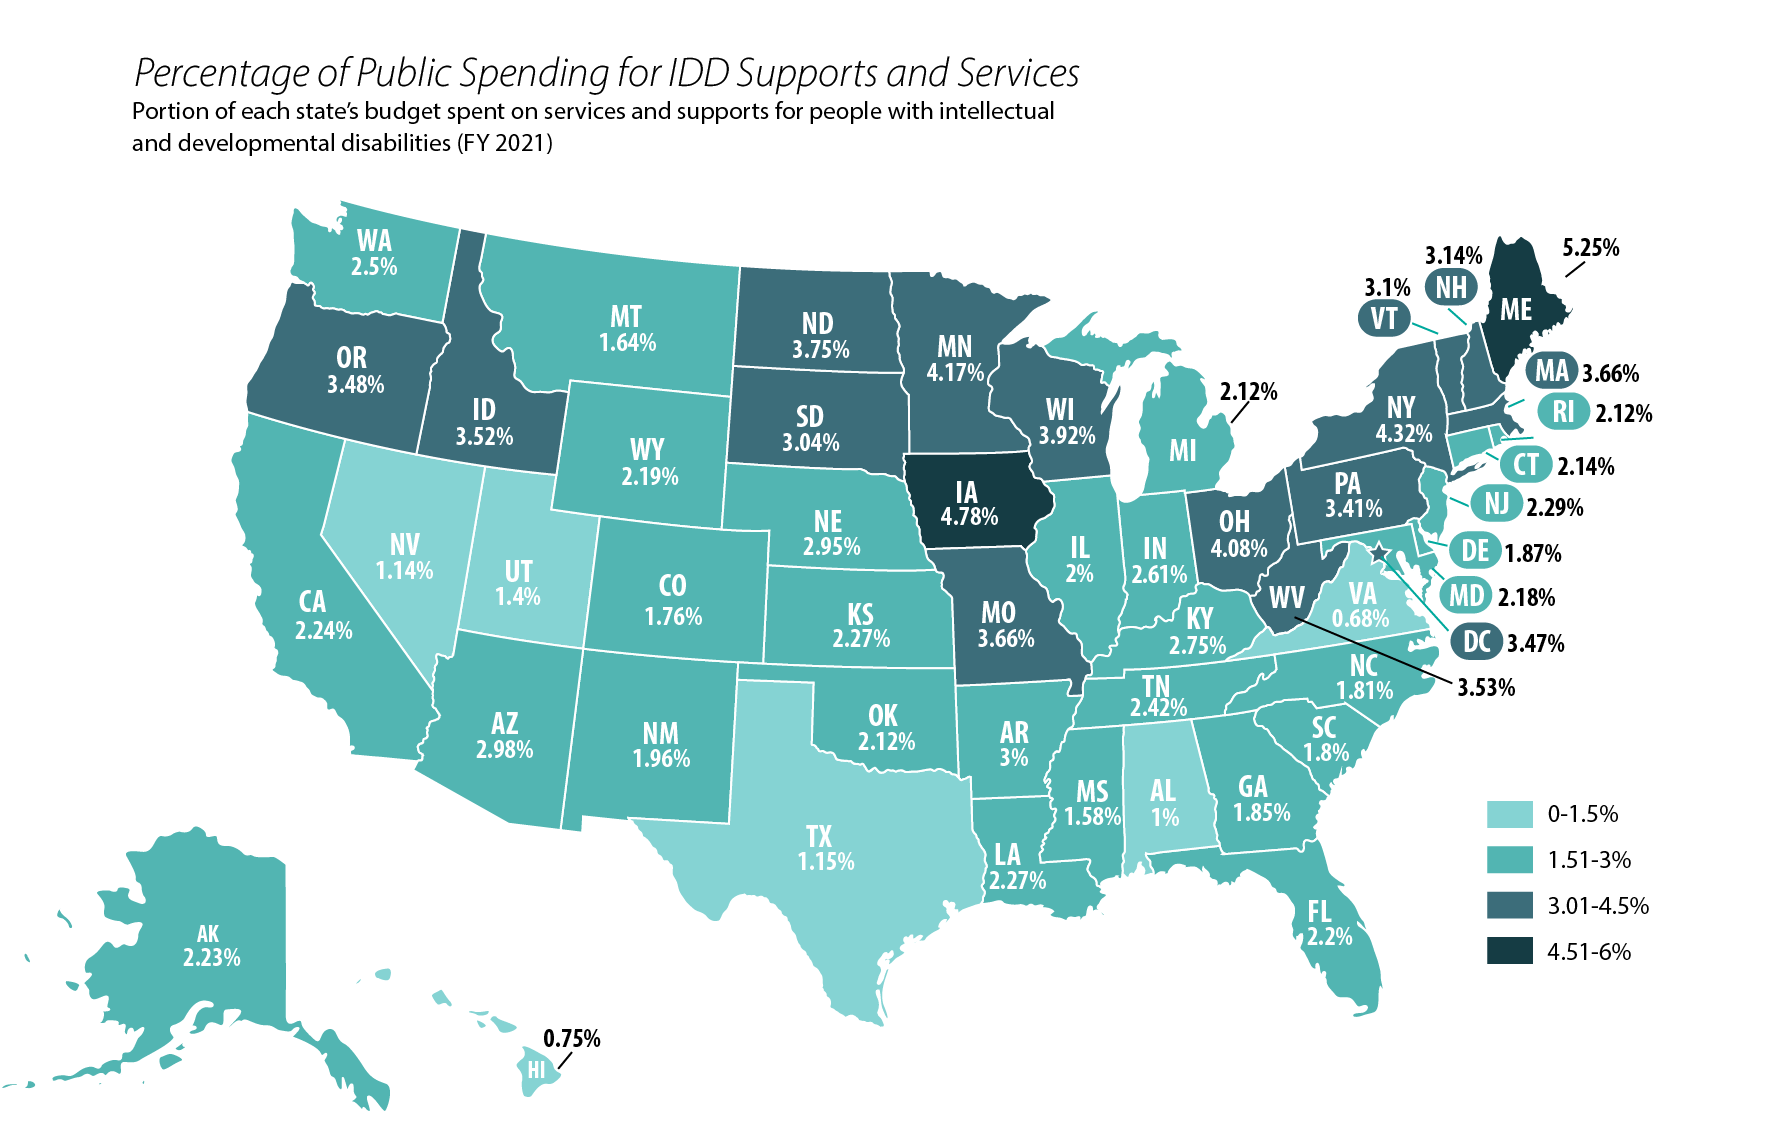 This map of the United States shows the percentage of public spending in each state for IDD supports and services, ranging from .75% in Hawaii to 5.25% in Maine. 